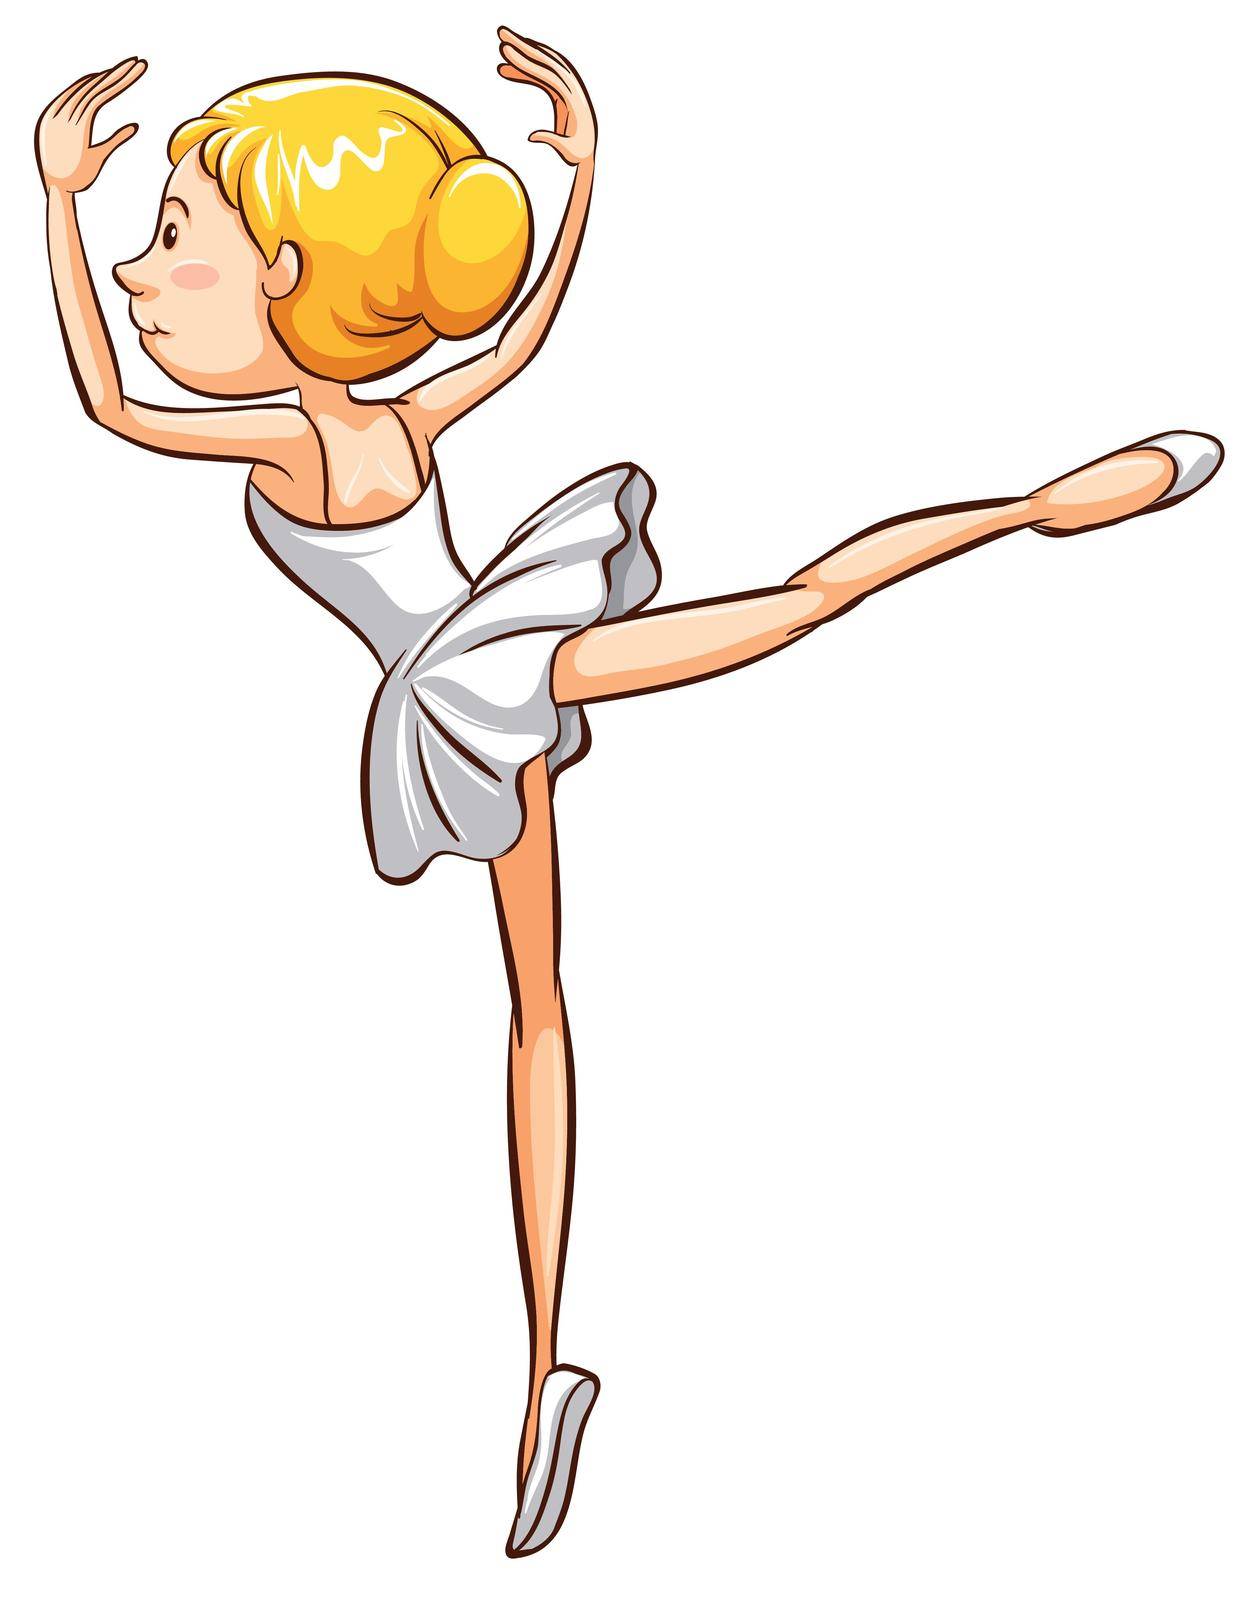 Illustration of a simple sketch of a ballerina on a white background